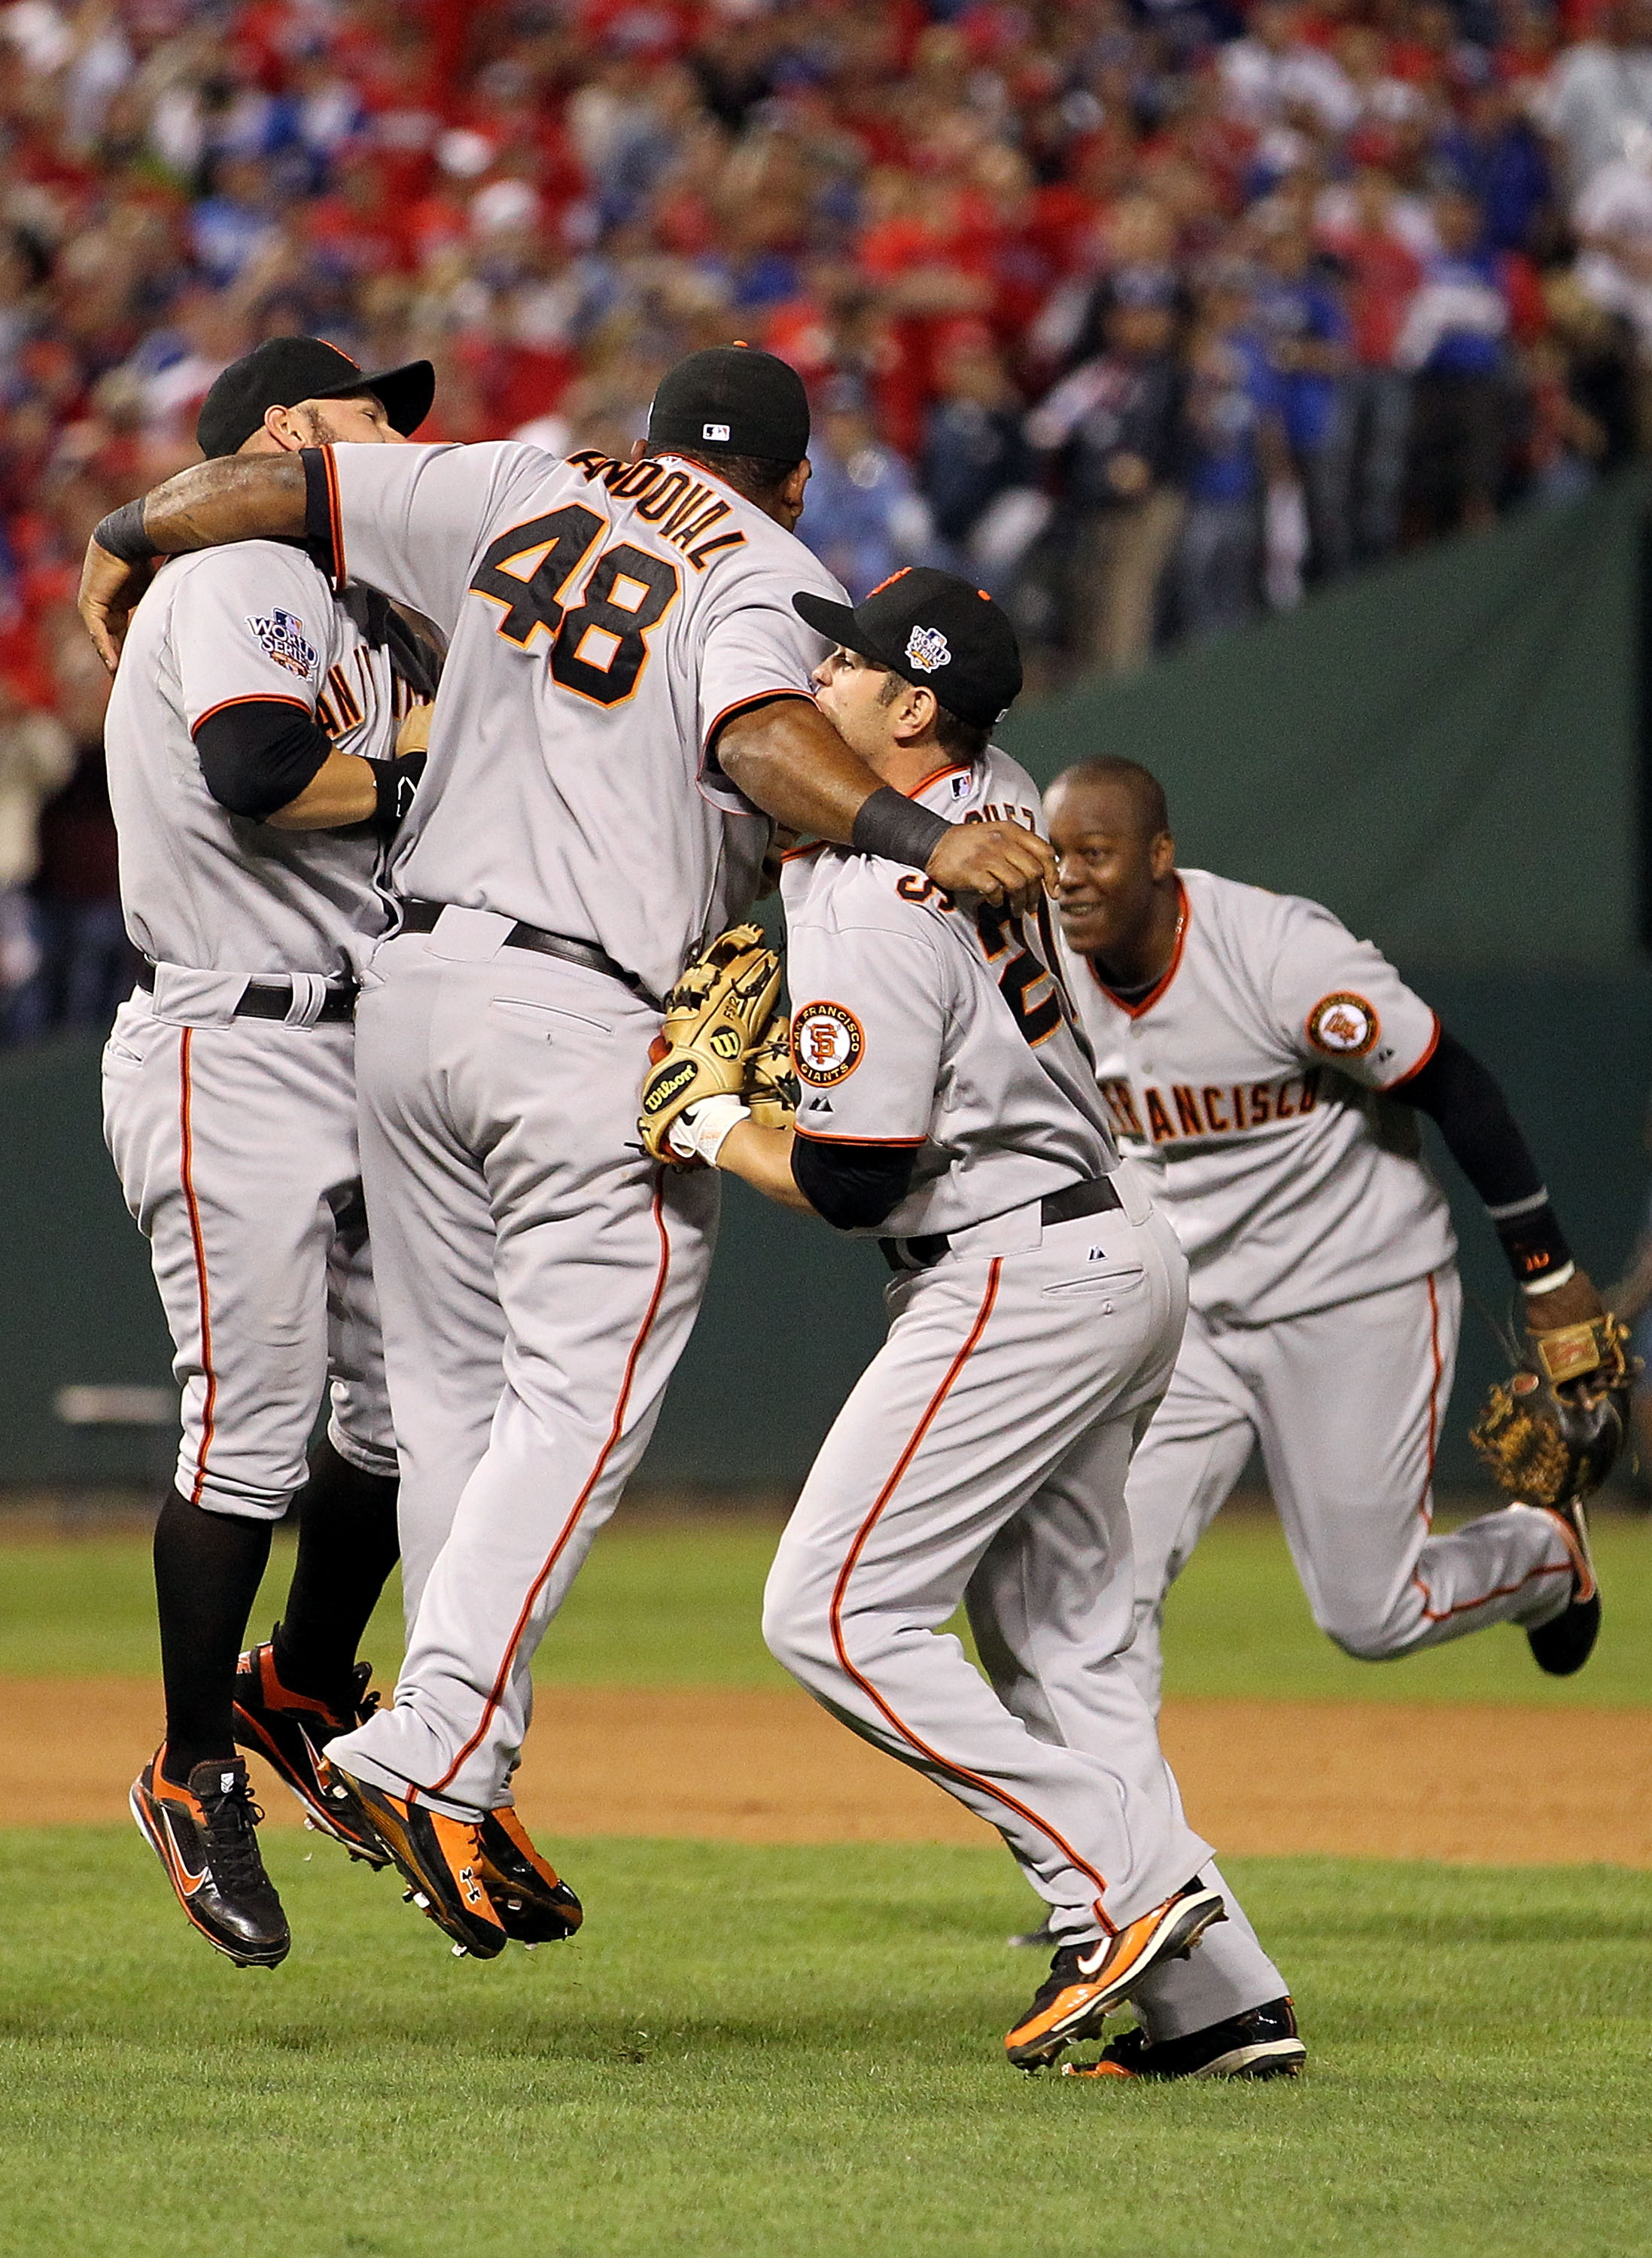 ARLINGTON, TX - NOVEMBER 01:  (L-R) Cody Ross #13, Pablo Sandoval #48, Freddy Sanchez #21 and Edgar Renteria #16 of the San Francisco Giants celebrate after they won 3-1 against the Texas Rangers in Game Five of the 2010 MLB World Series at Rangers Ballpa